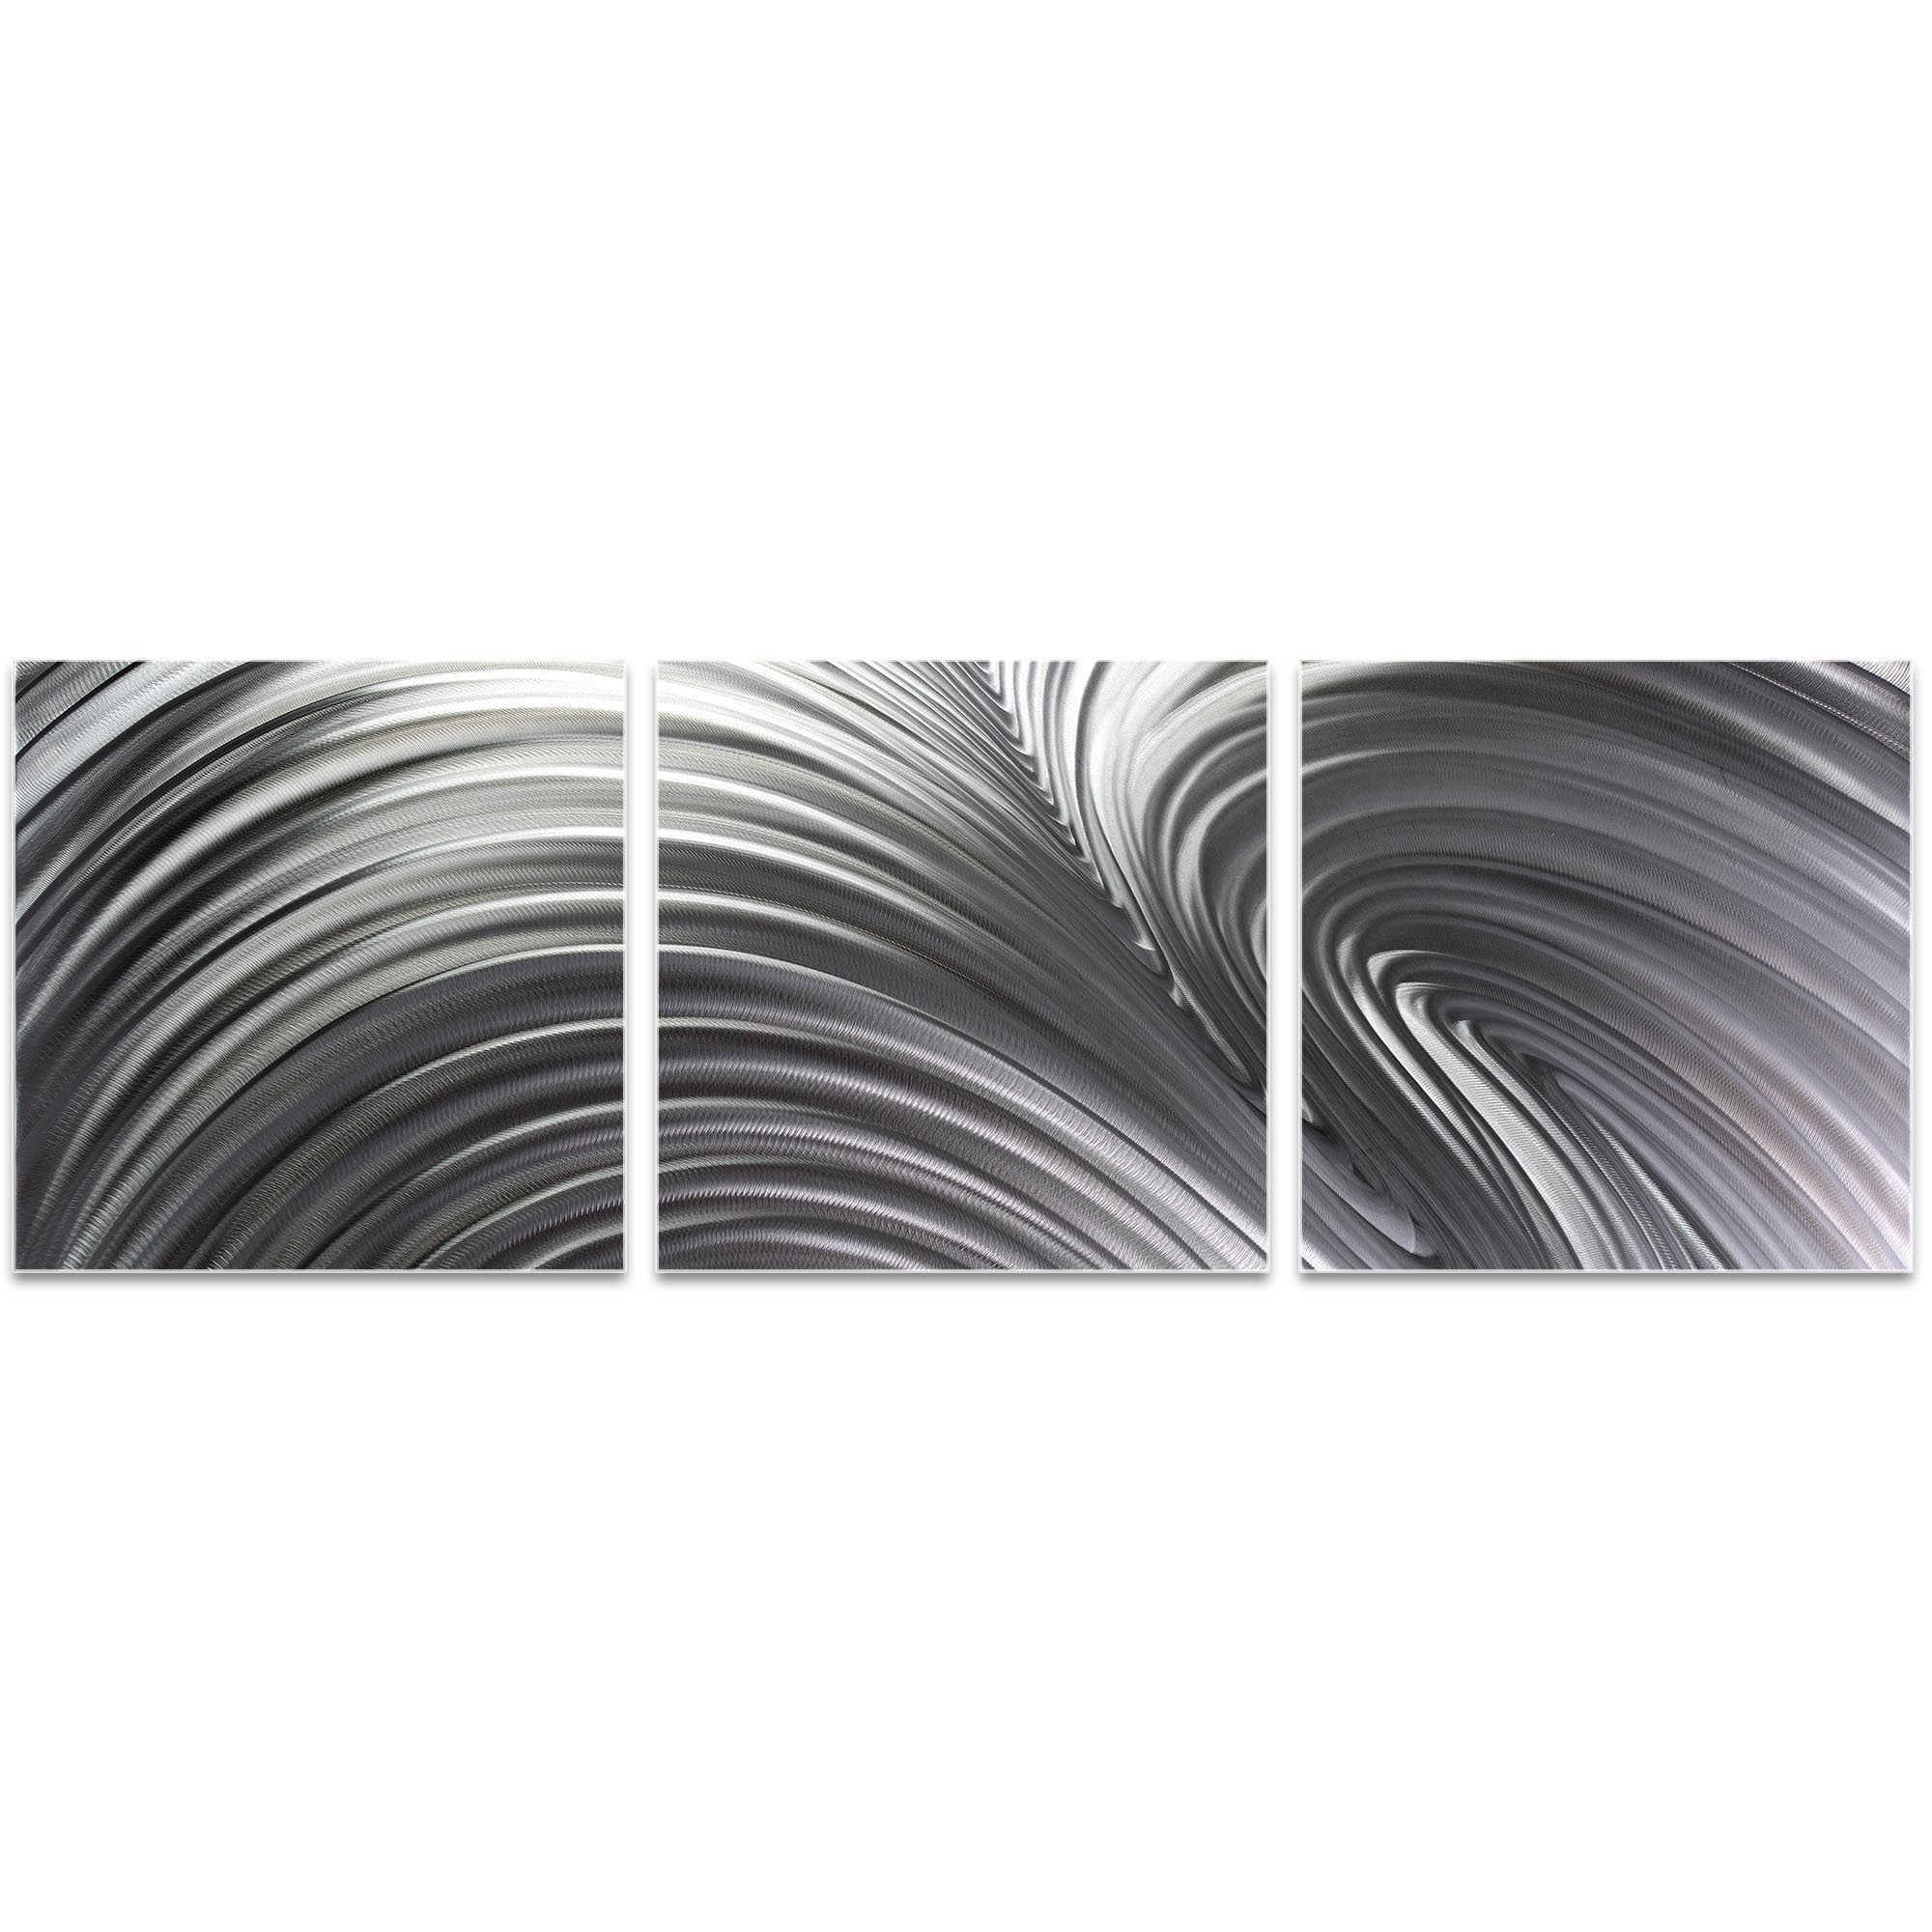 Fusion Triptych Large 70x22in. Metal or Acrylic Contemporary Decor - Image 2